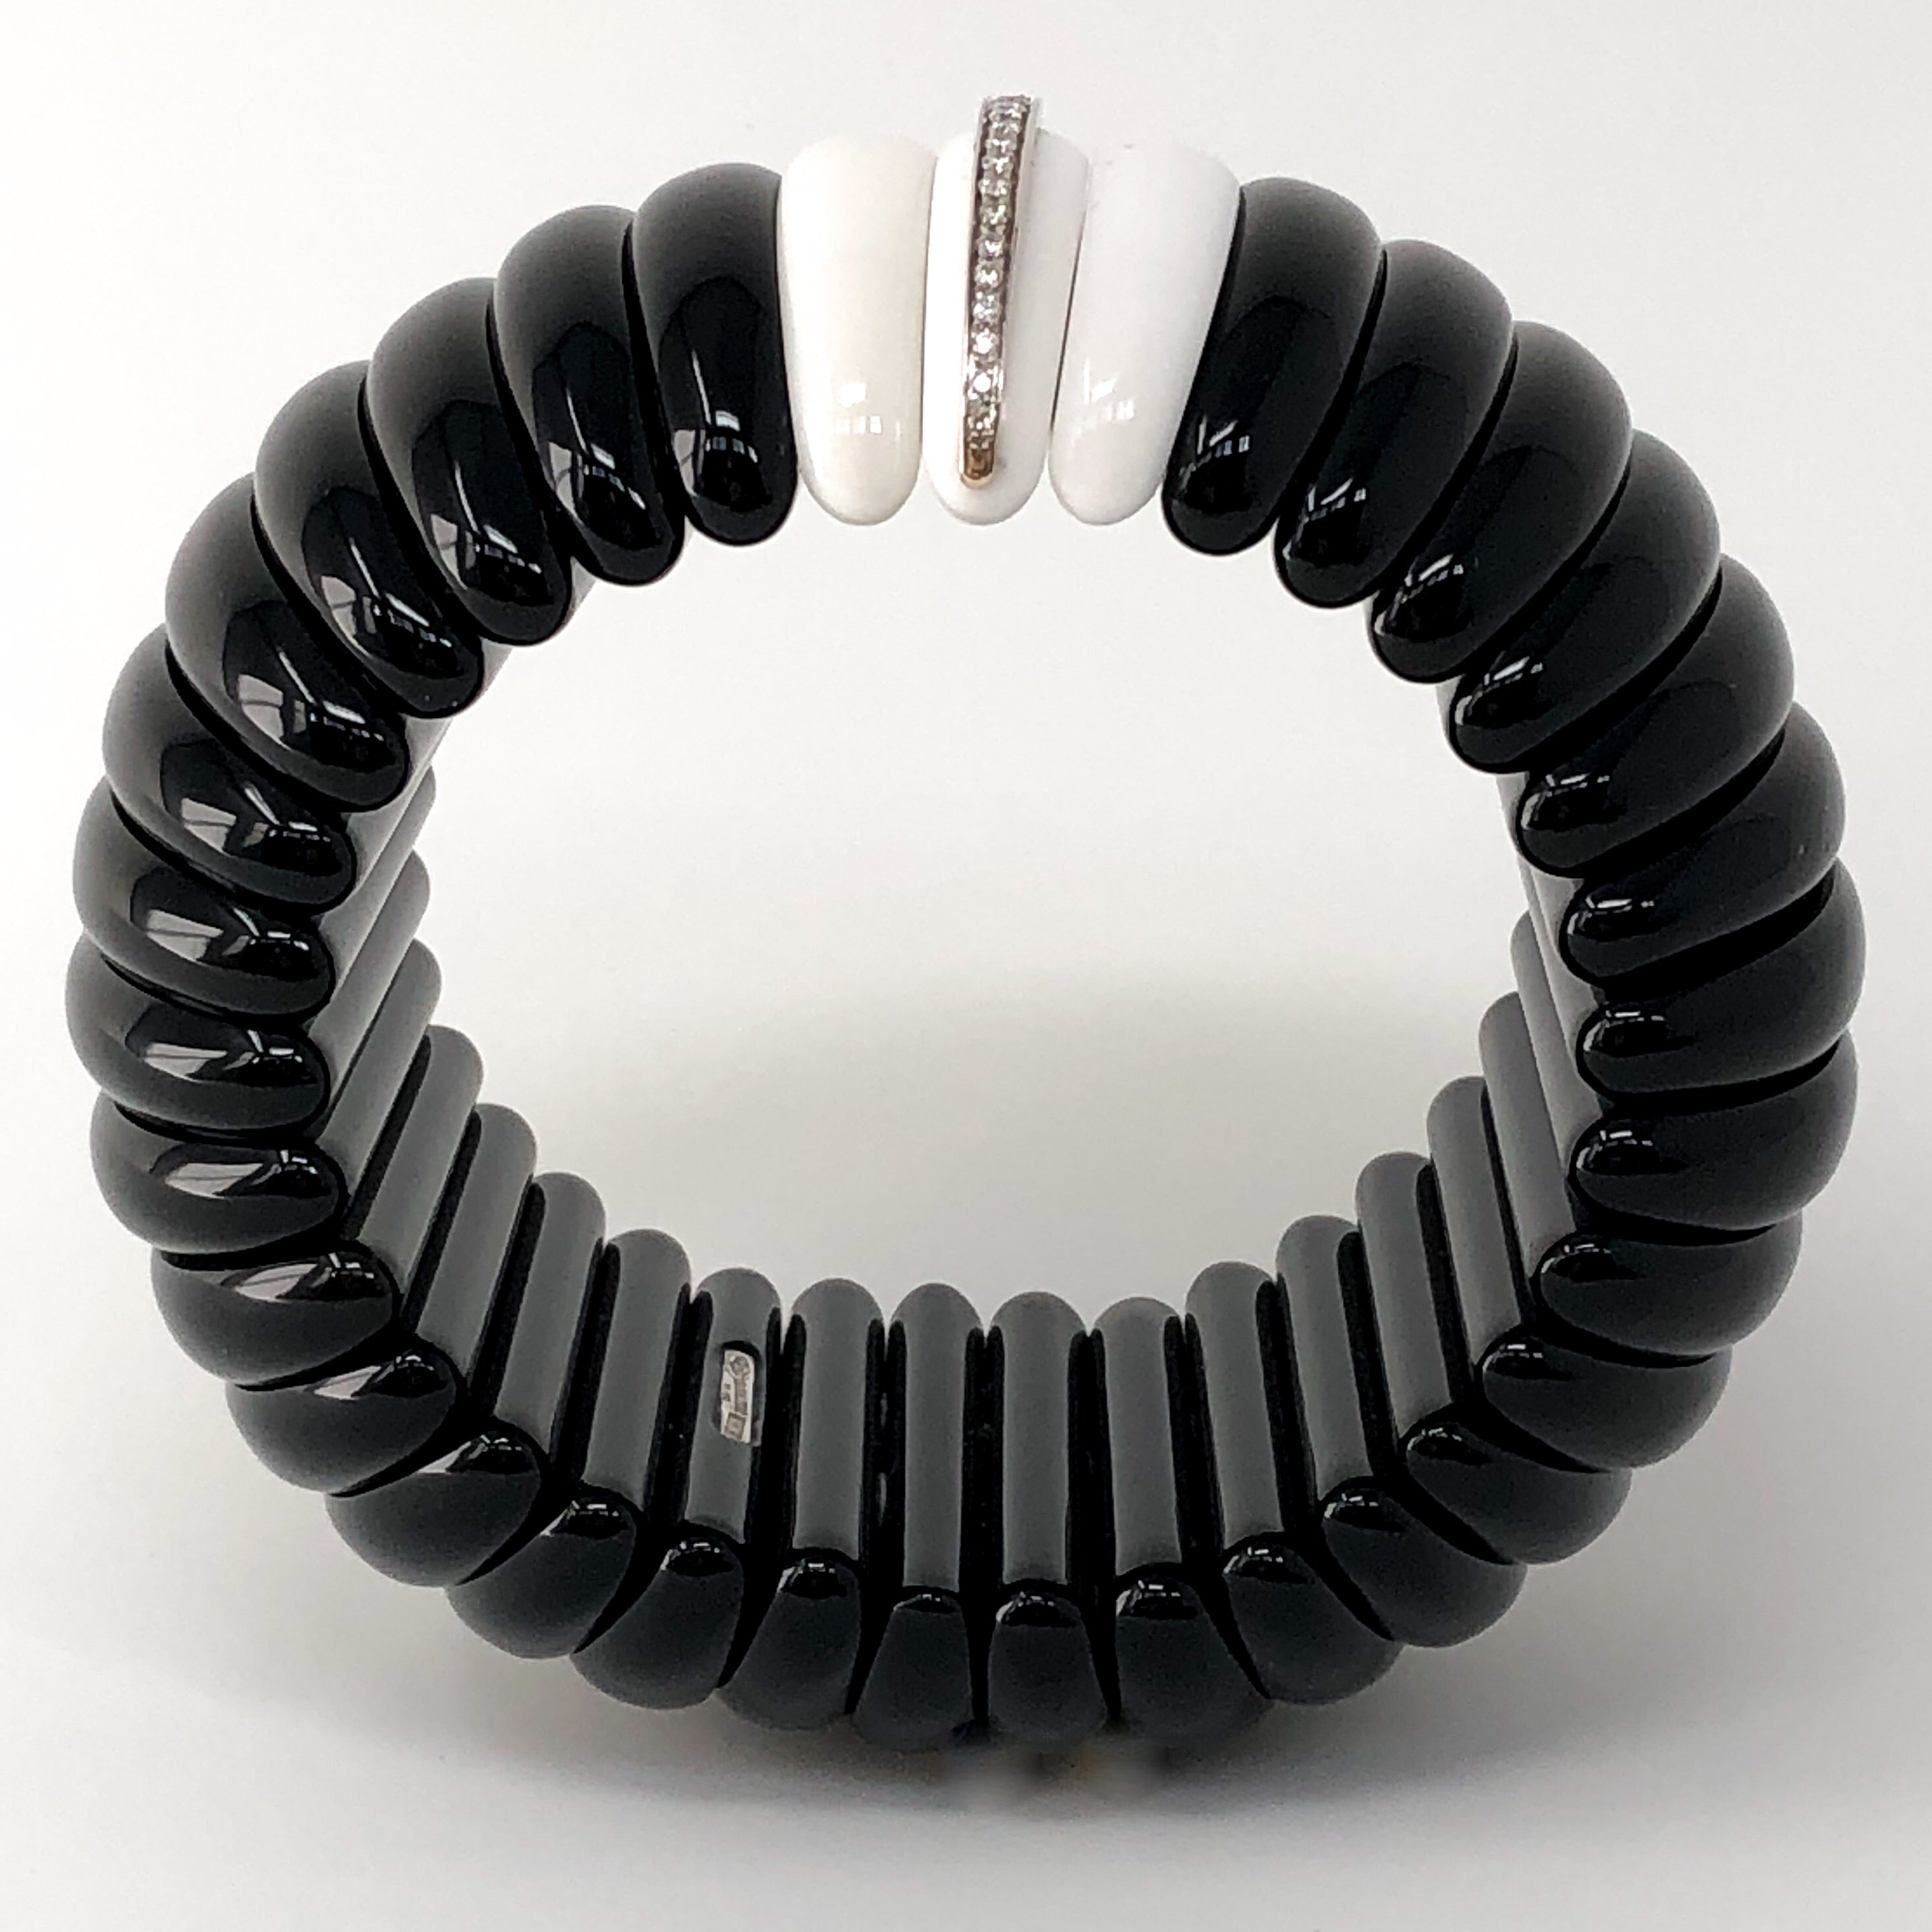 Hand-Carved Obsidian and Agate Bracelet with Diamonds